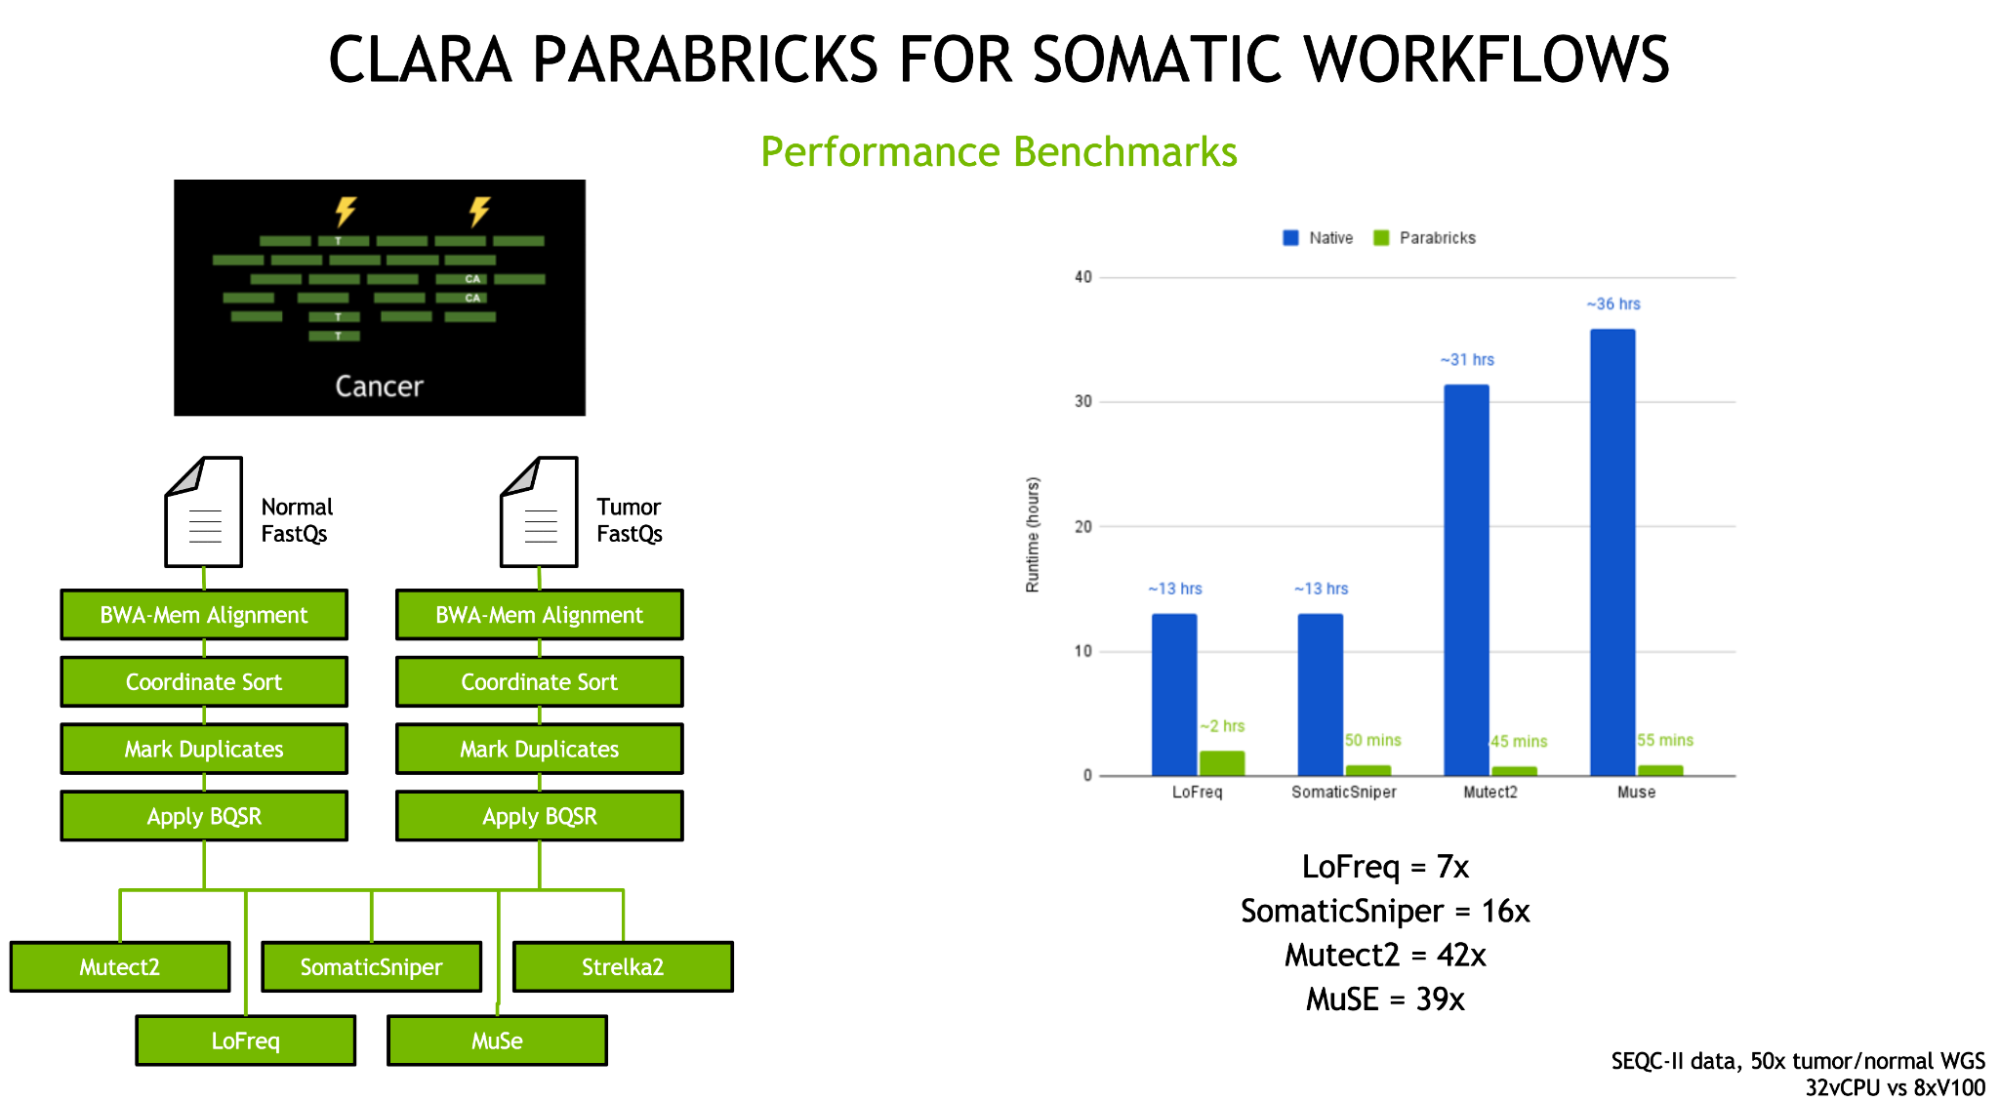 Shows the workflow of Parabricks for somatic workflows and performance benchmarks exceeding native runtimes. 